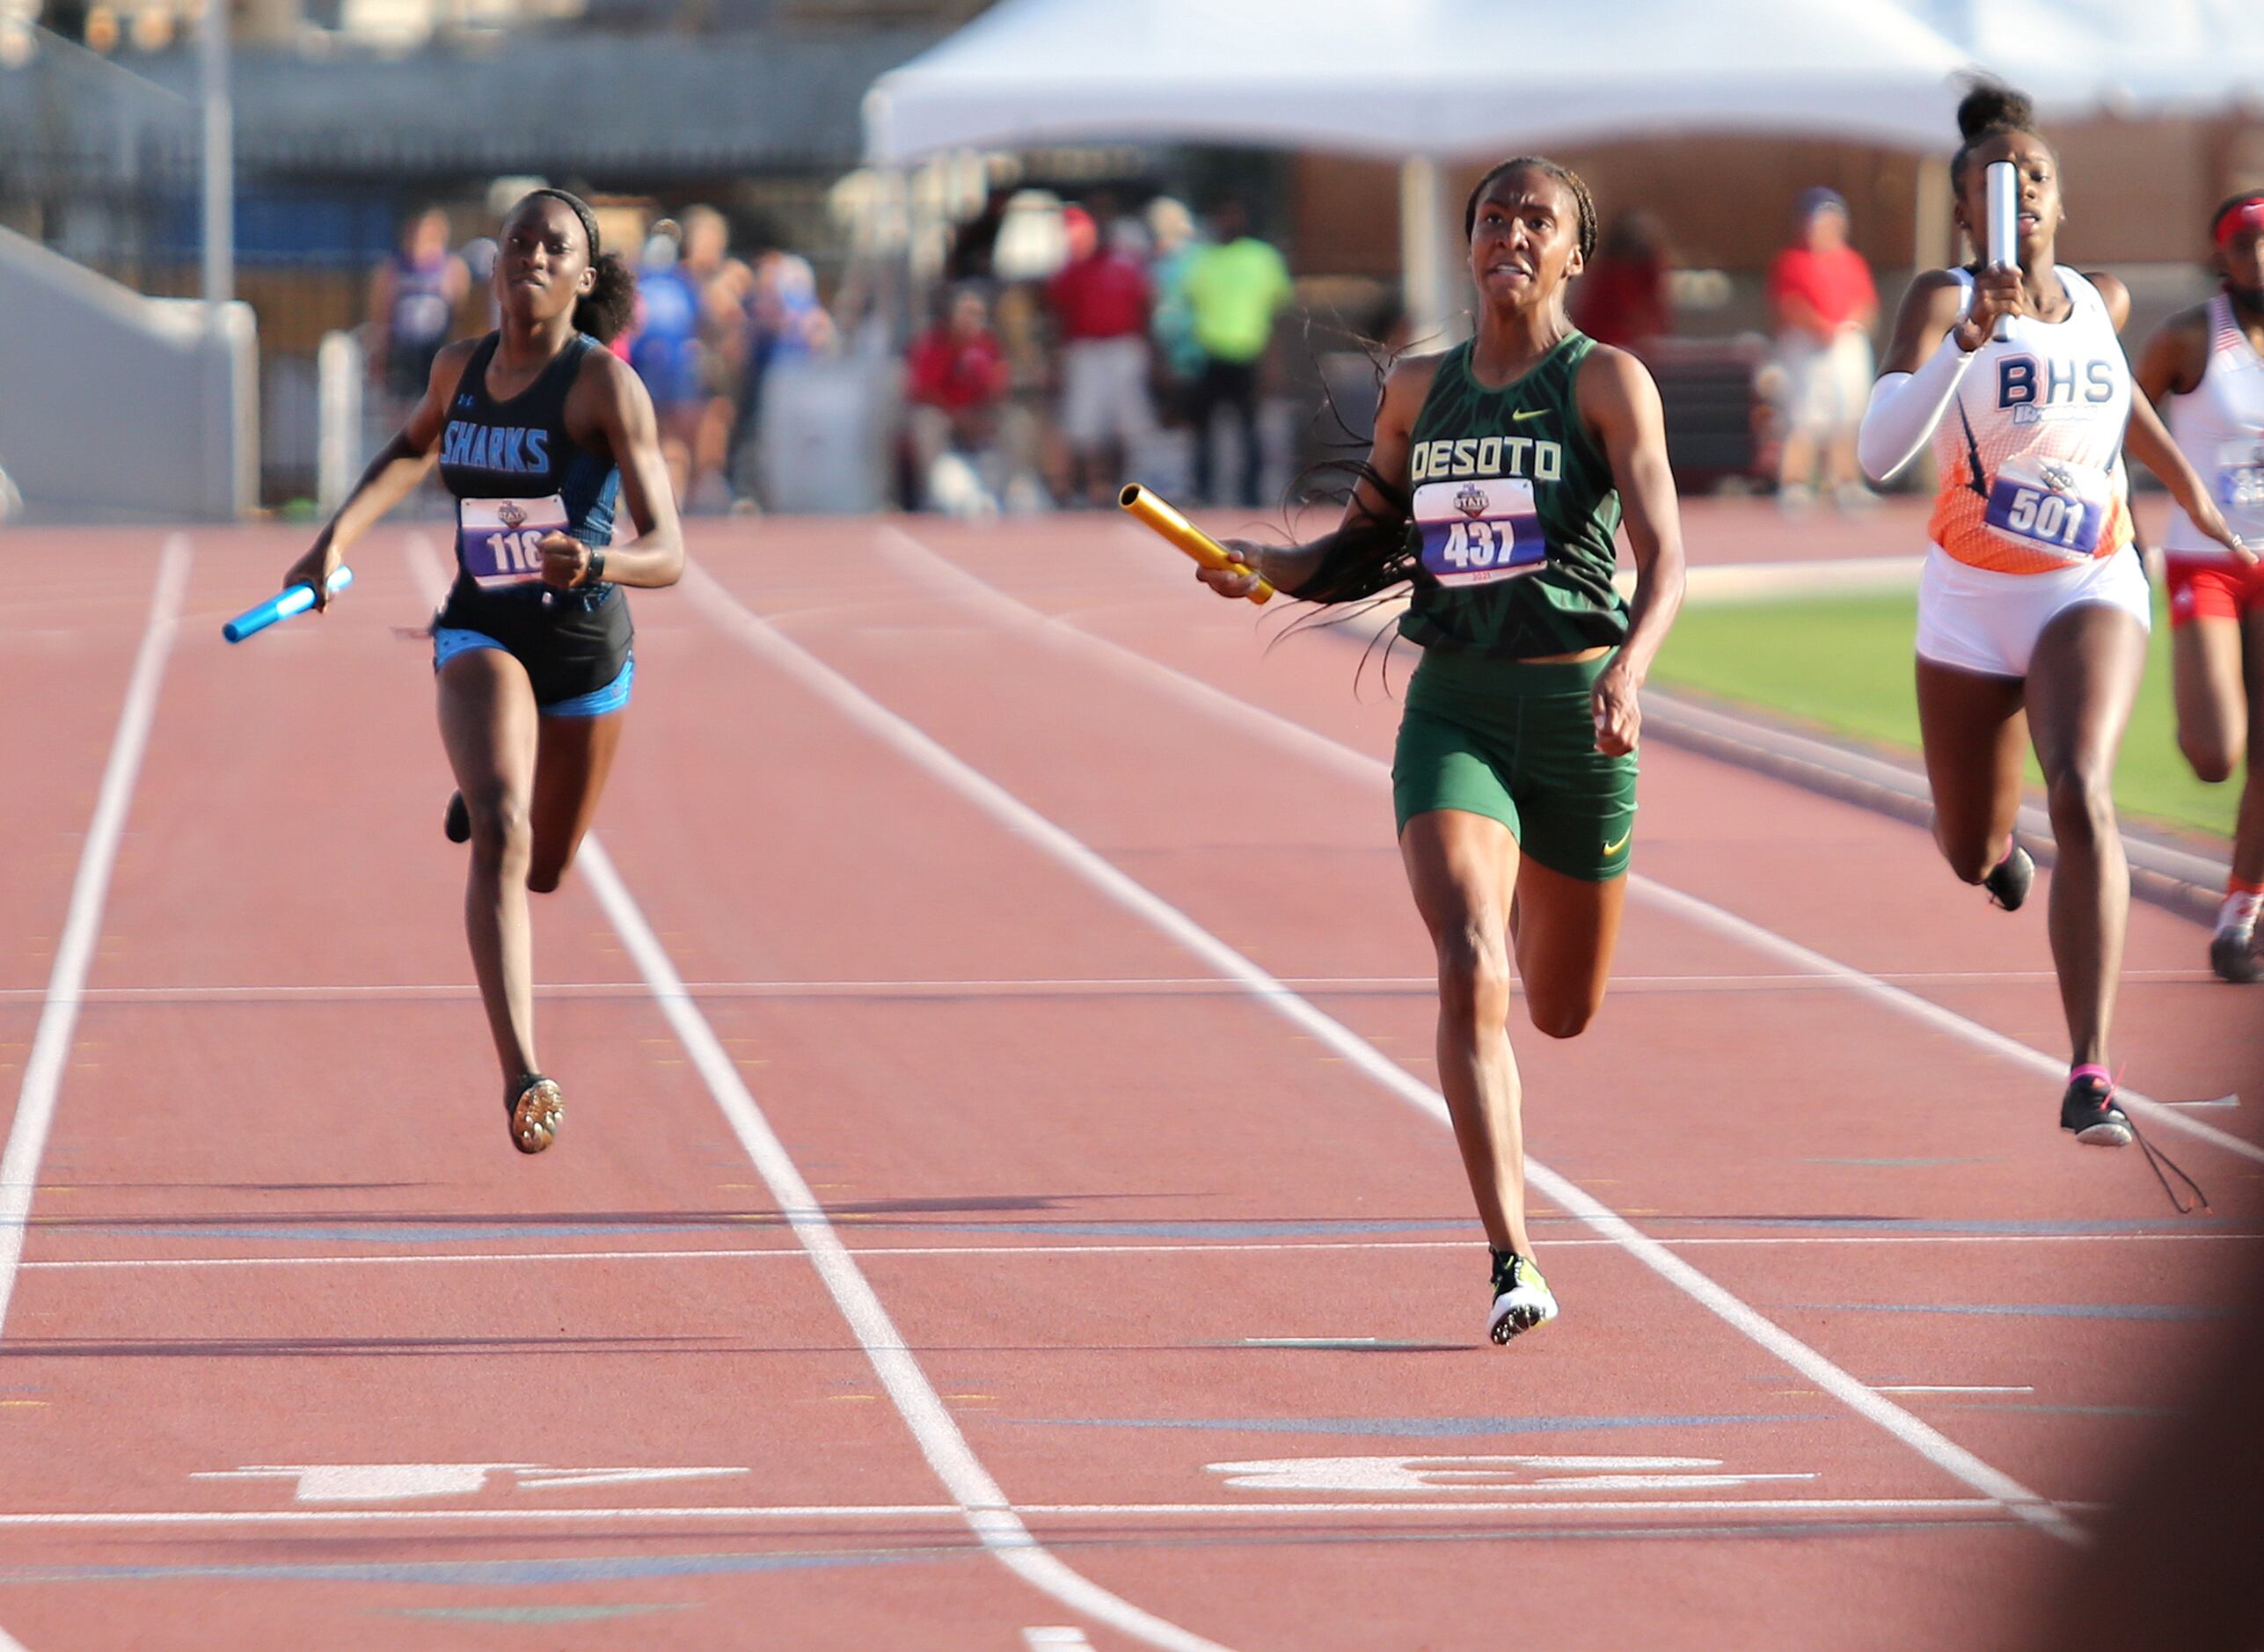 Logan Neely of DeSoto crosses the finish line in first place at the 6A Girls 4x200 meter...